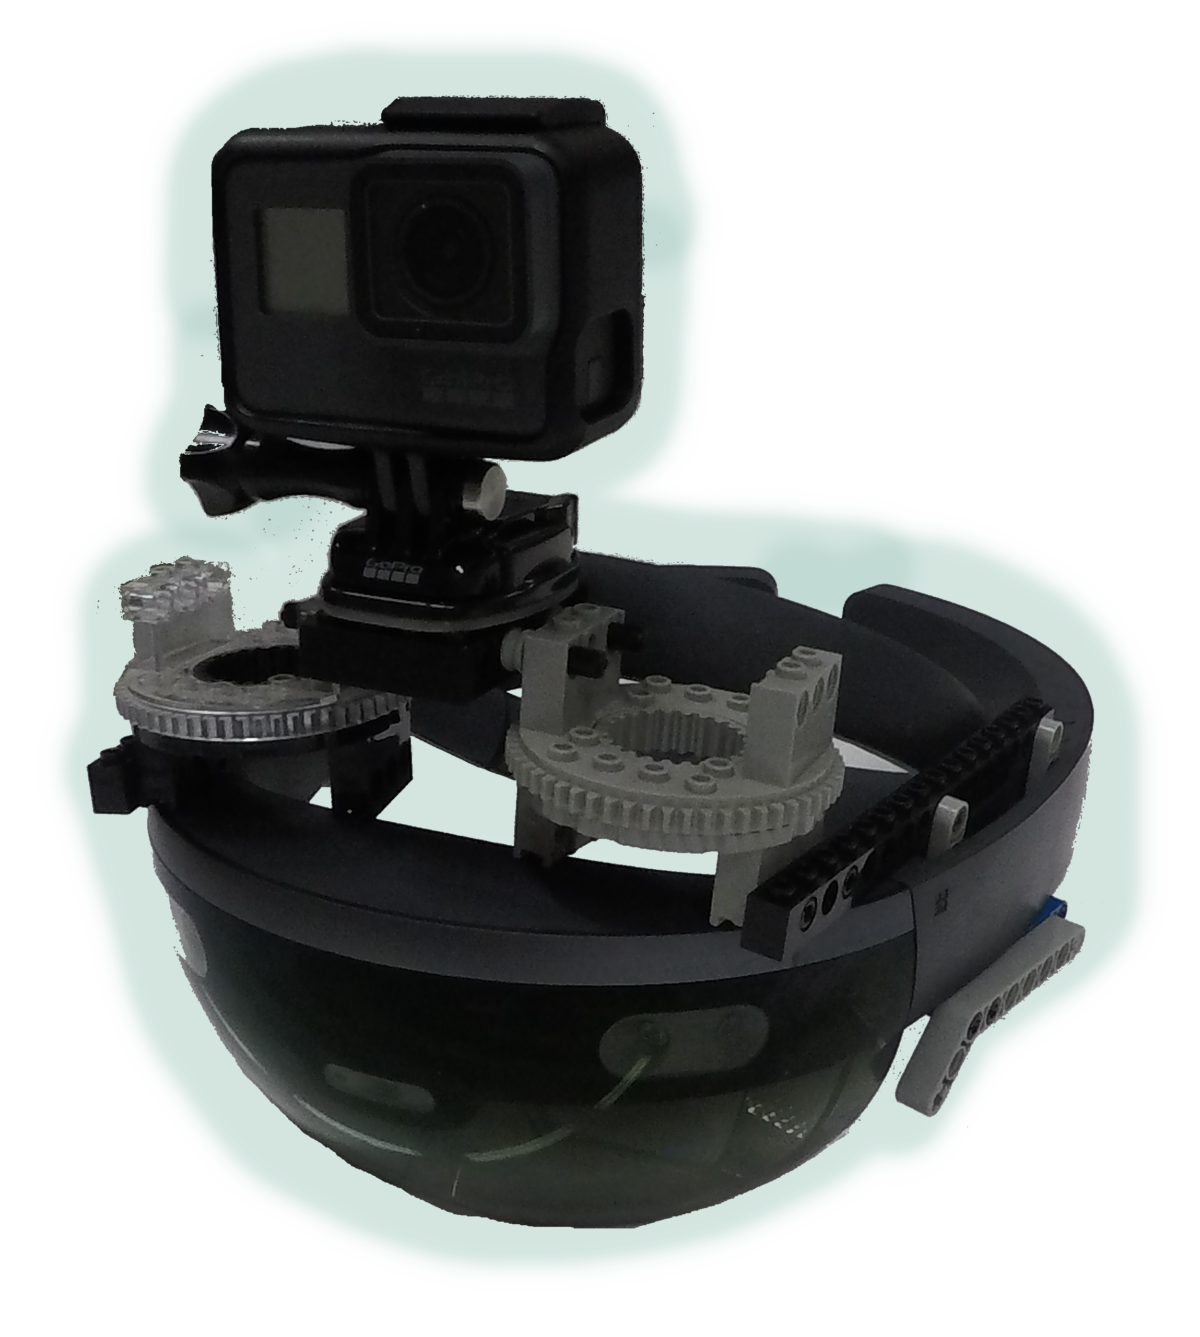 HoloLens with GoPro mounted on top